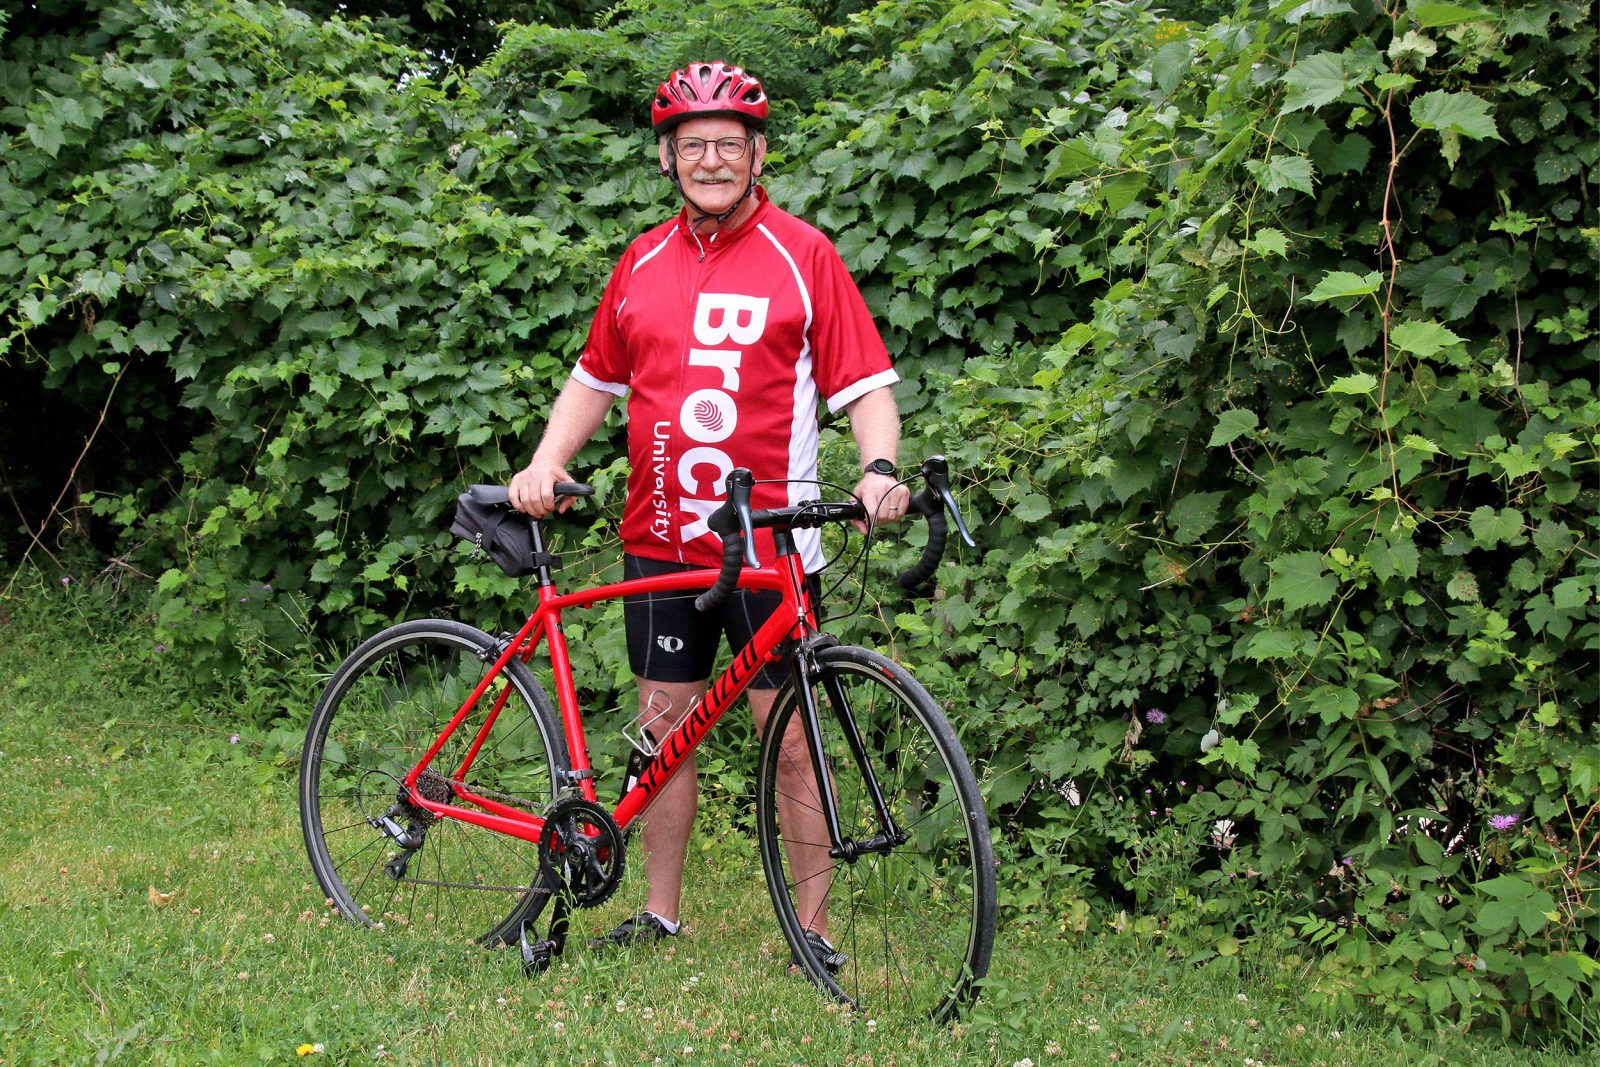 Alan Castle poses in front of lush greenery with his red bicycle. He is wearing a red Brock University cycling jersey, a red helmet and black cycling shoes.